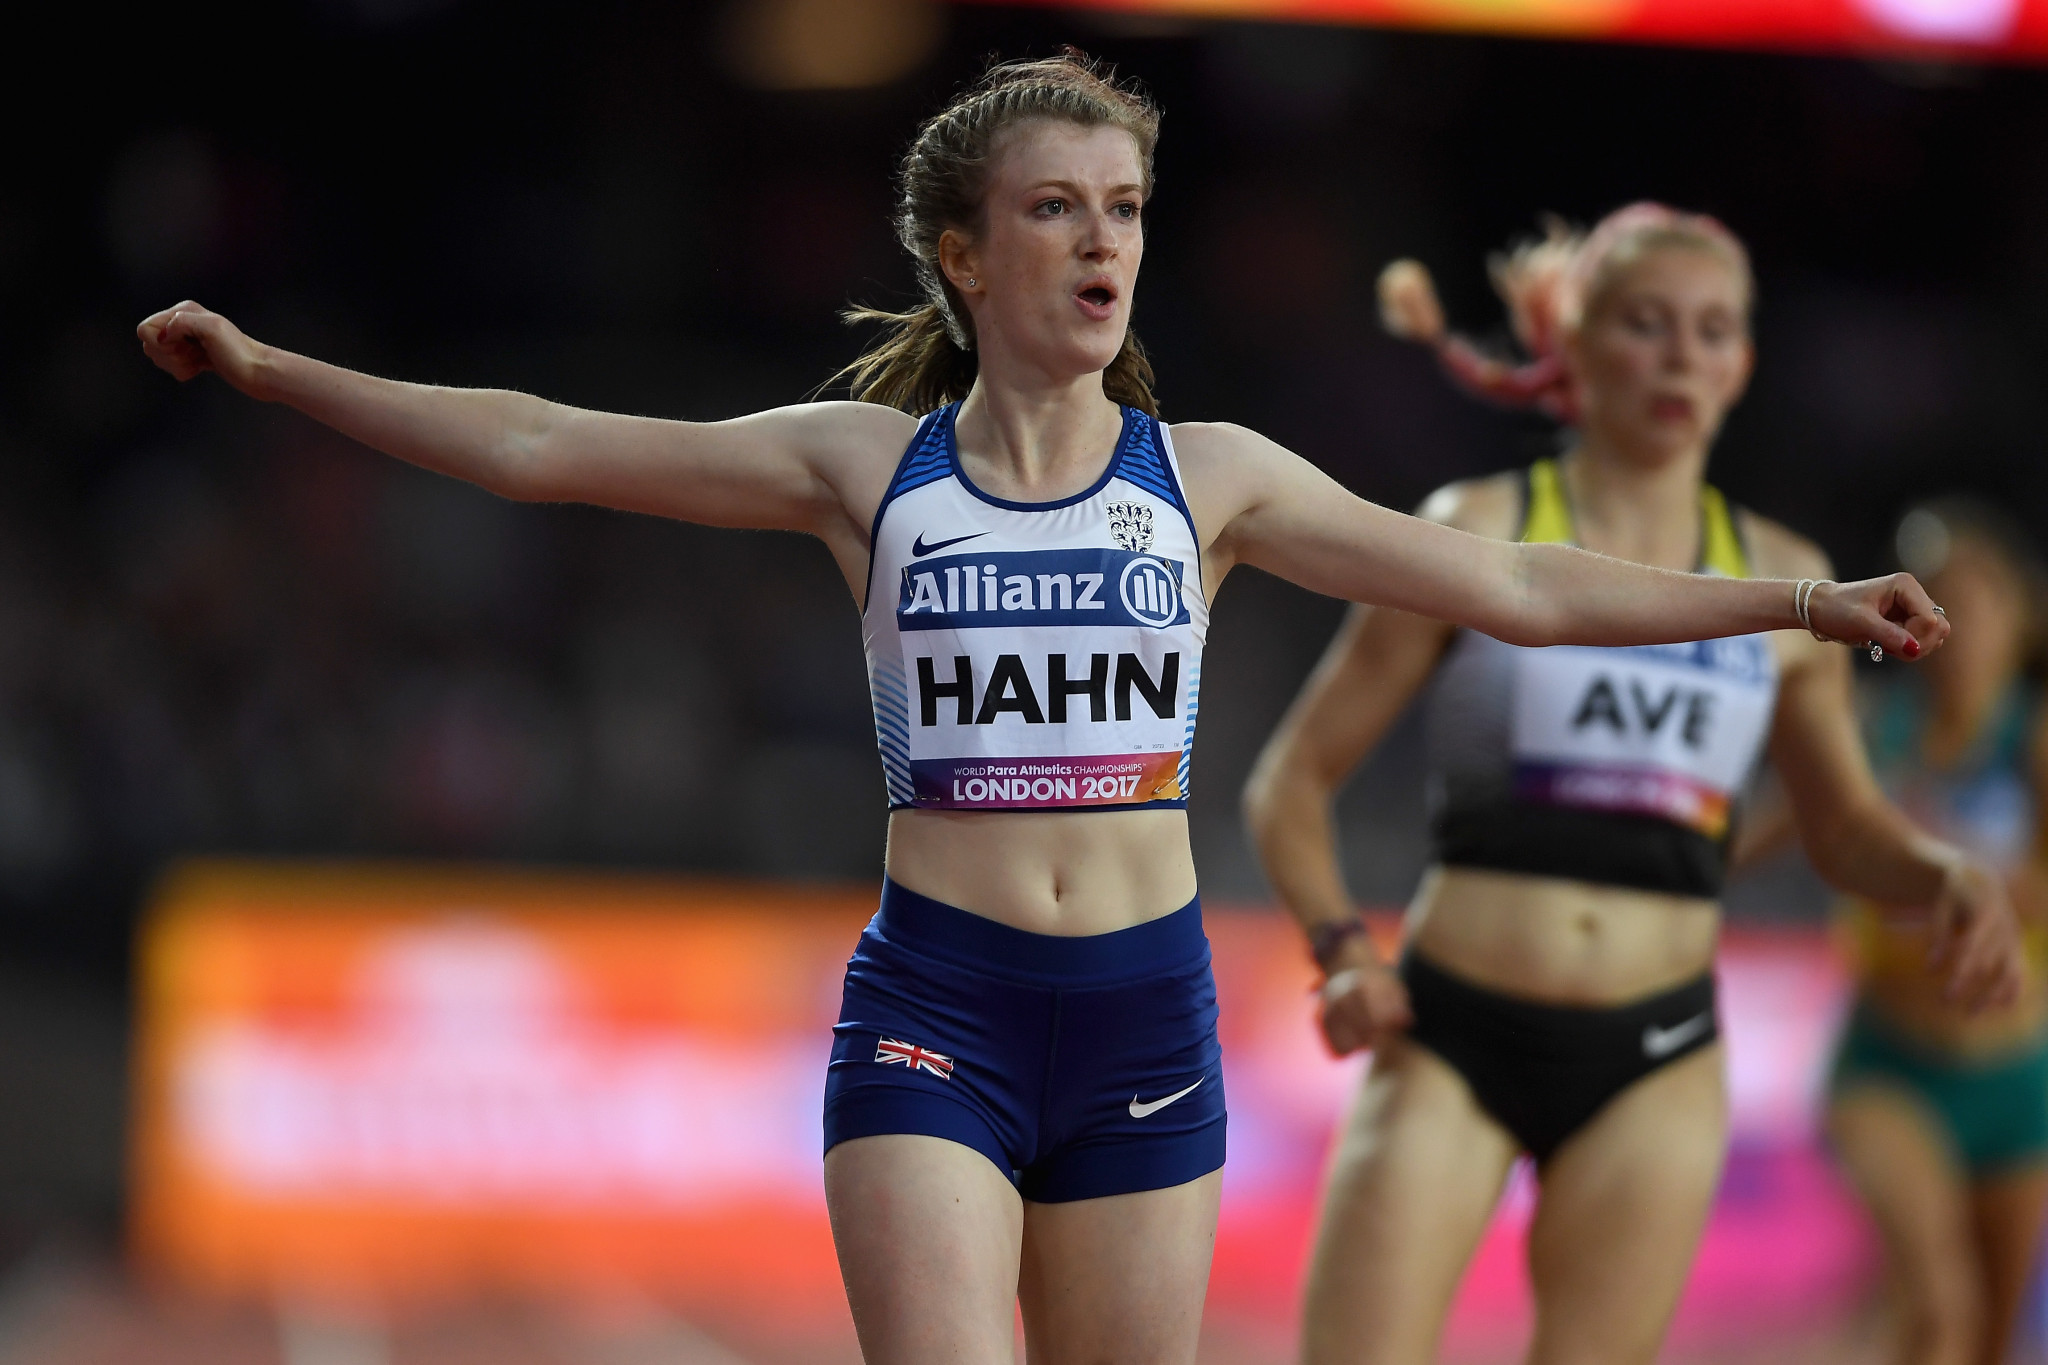 Craig Spence criticised the father of Paralympian Olivia Breen, Michael, who had used parliamentary privilege to name Sophie Hahn as a British athletes he believes is benefiting from being in the wrong class ©Getty Images